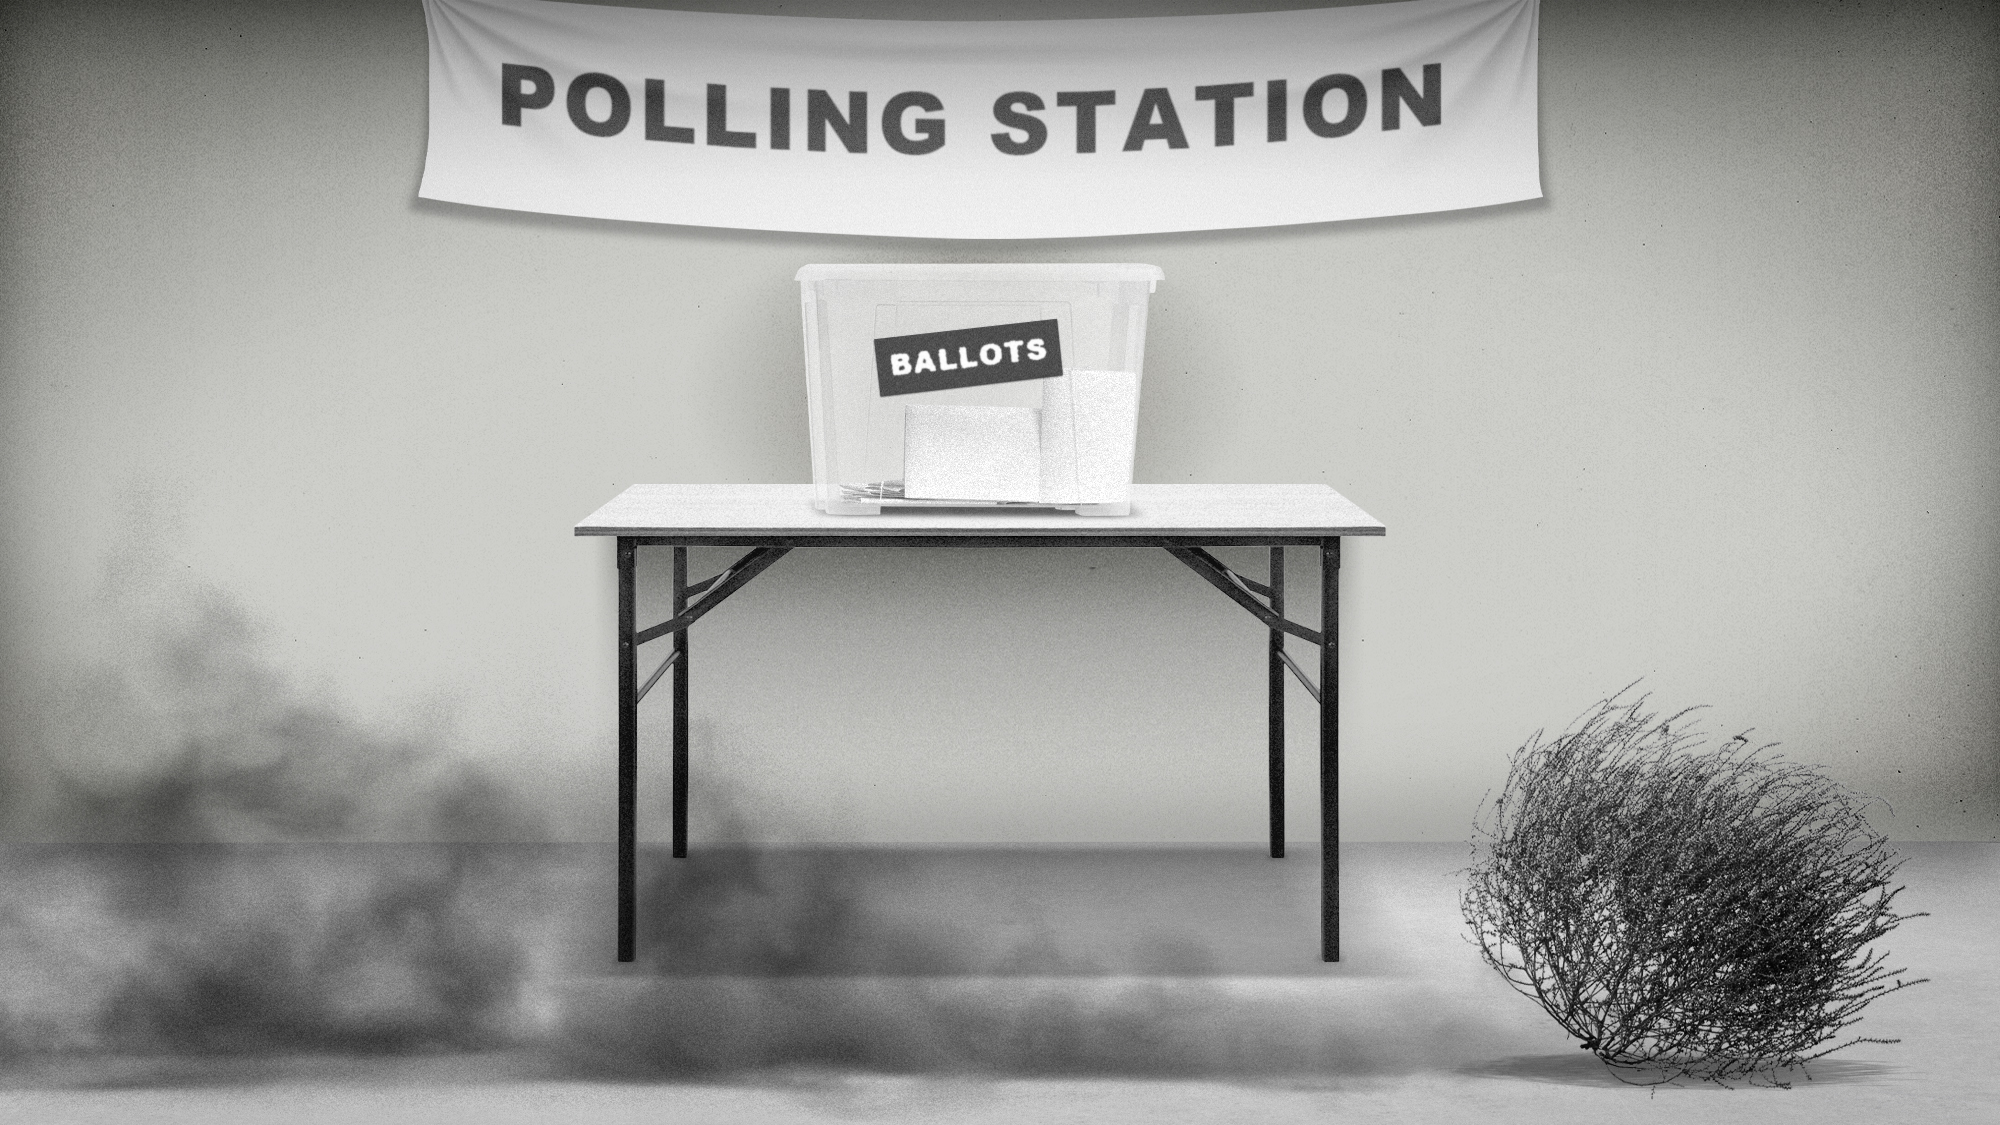 Will voter apathy and low turnout spoil the election?